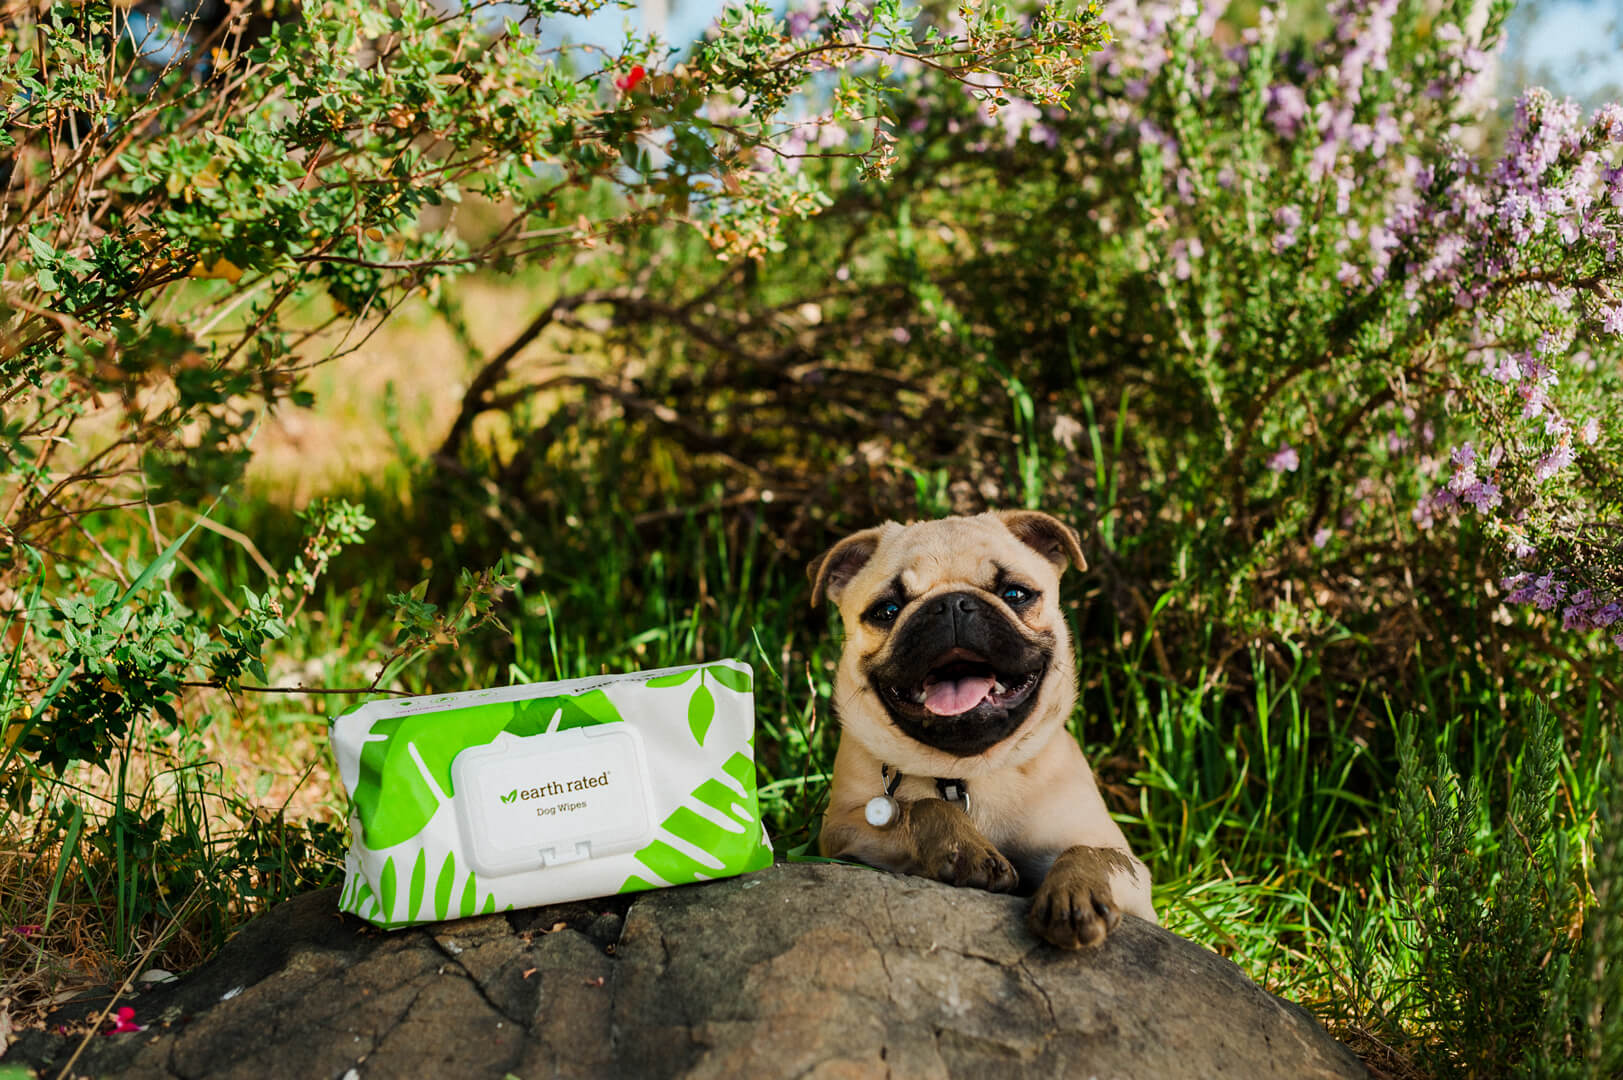 Dog smiling outside next to earth rated compostable dog grooming wipes - unscented